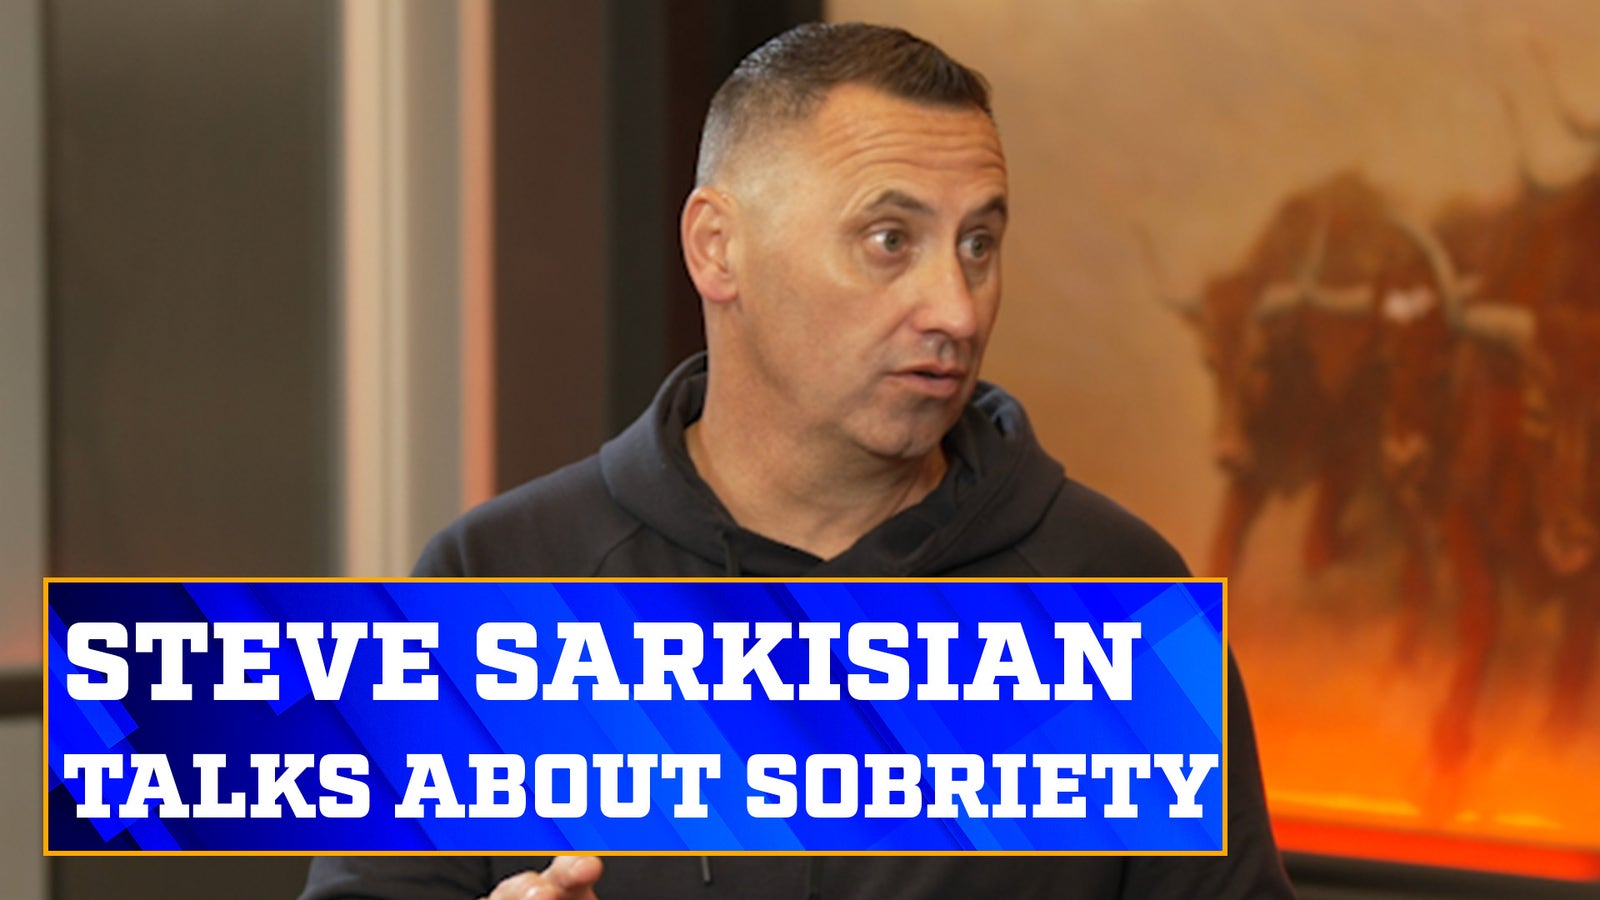 Texas HC Steve Sarkisian opens up about his sobriety journey